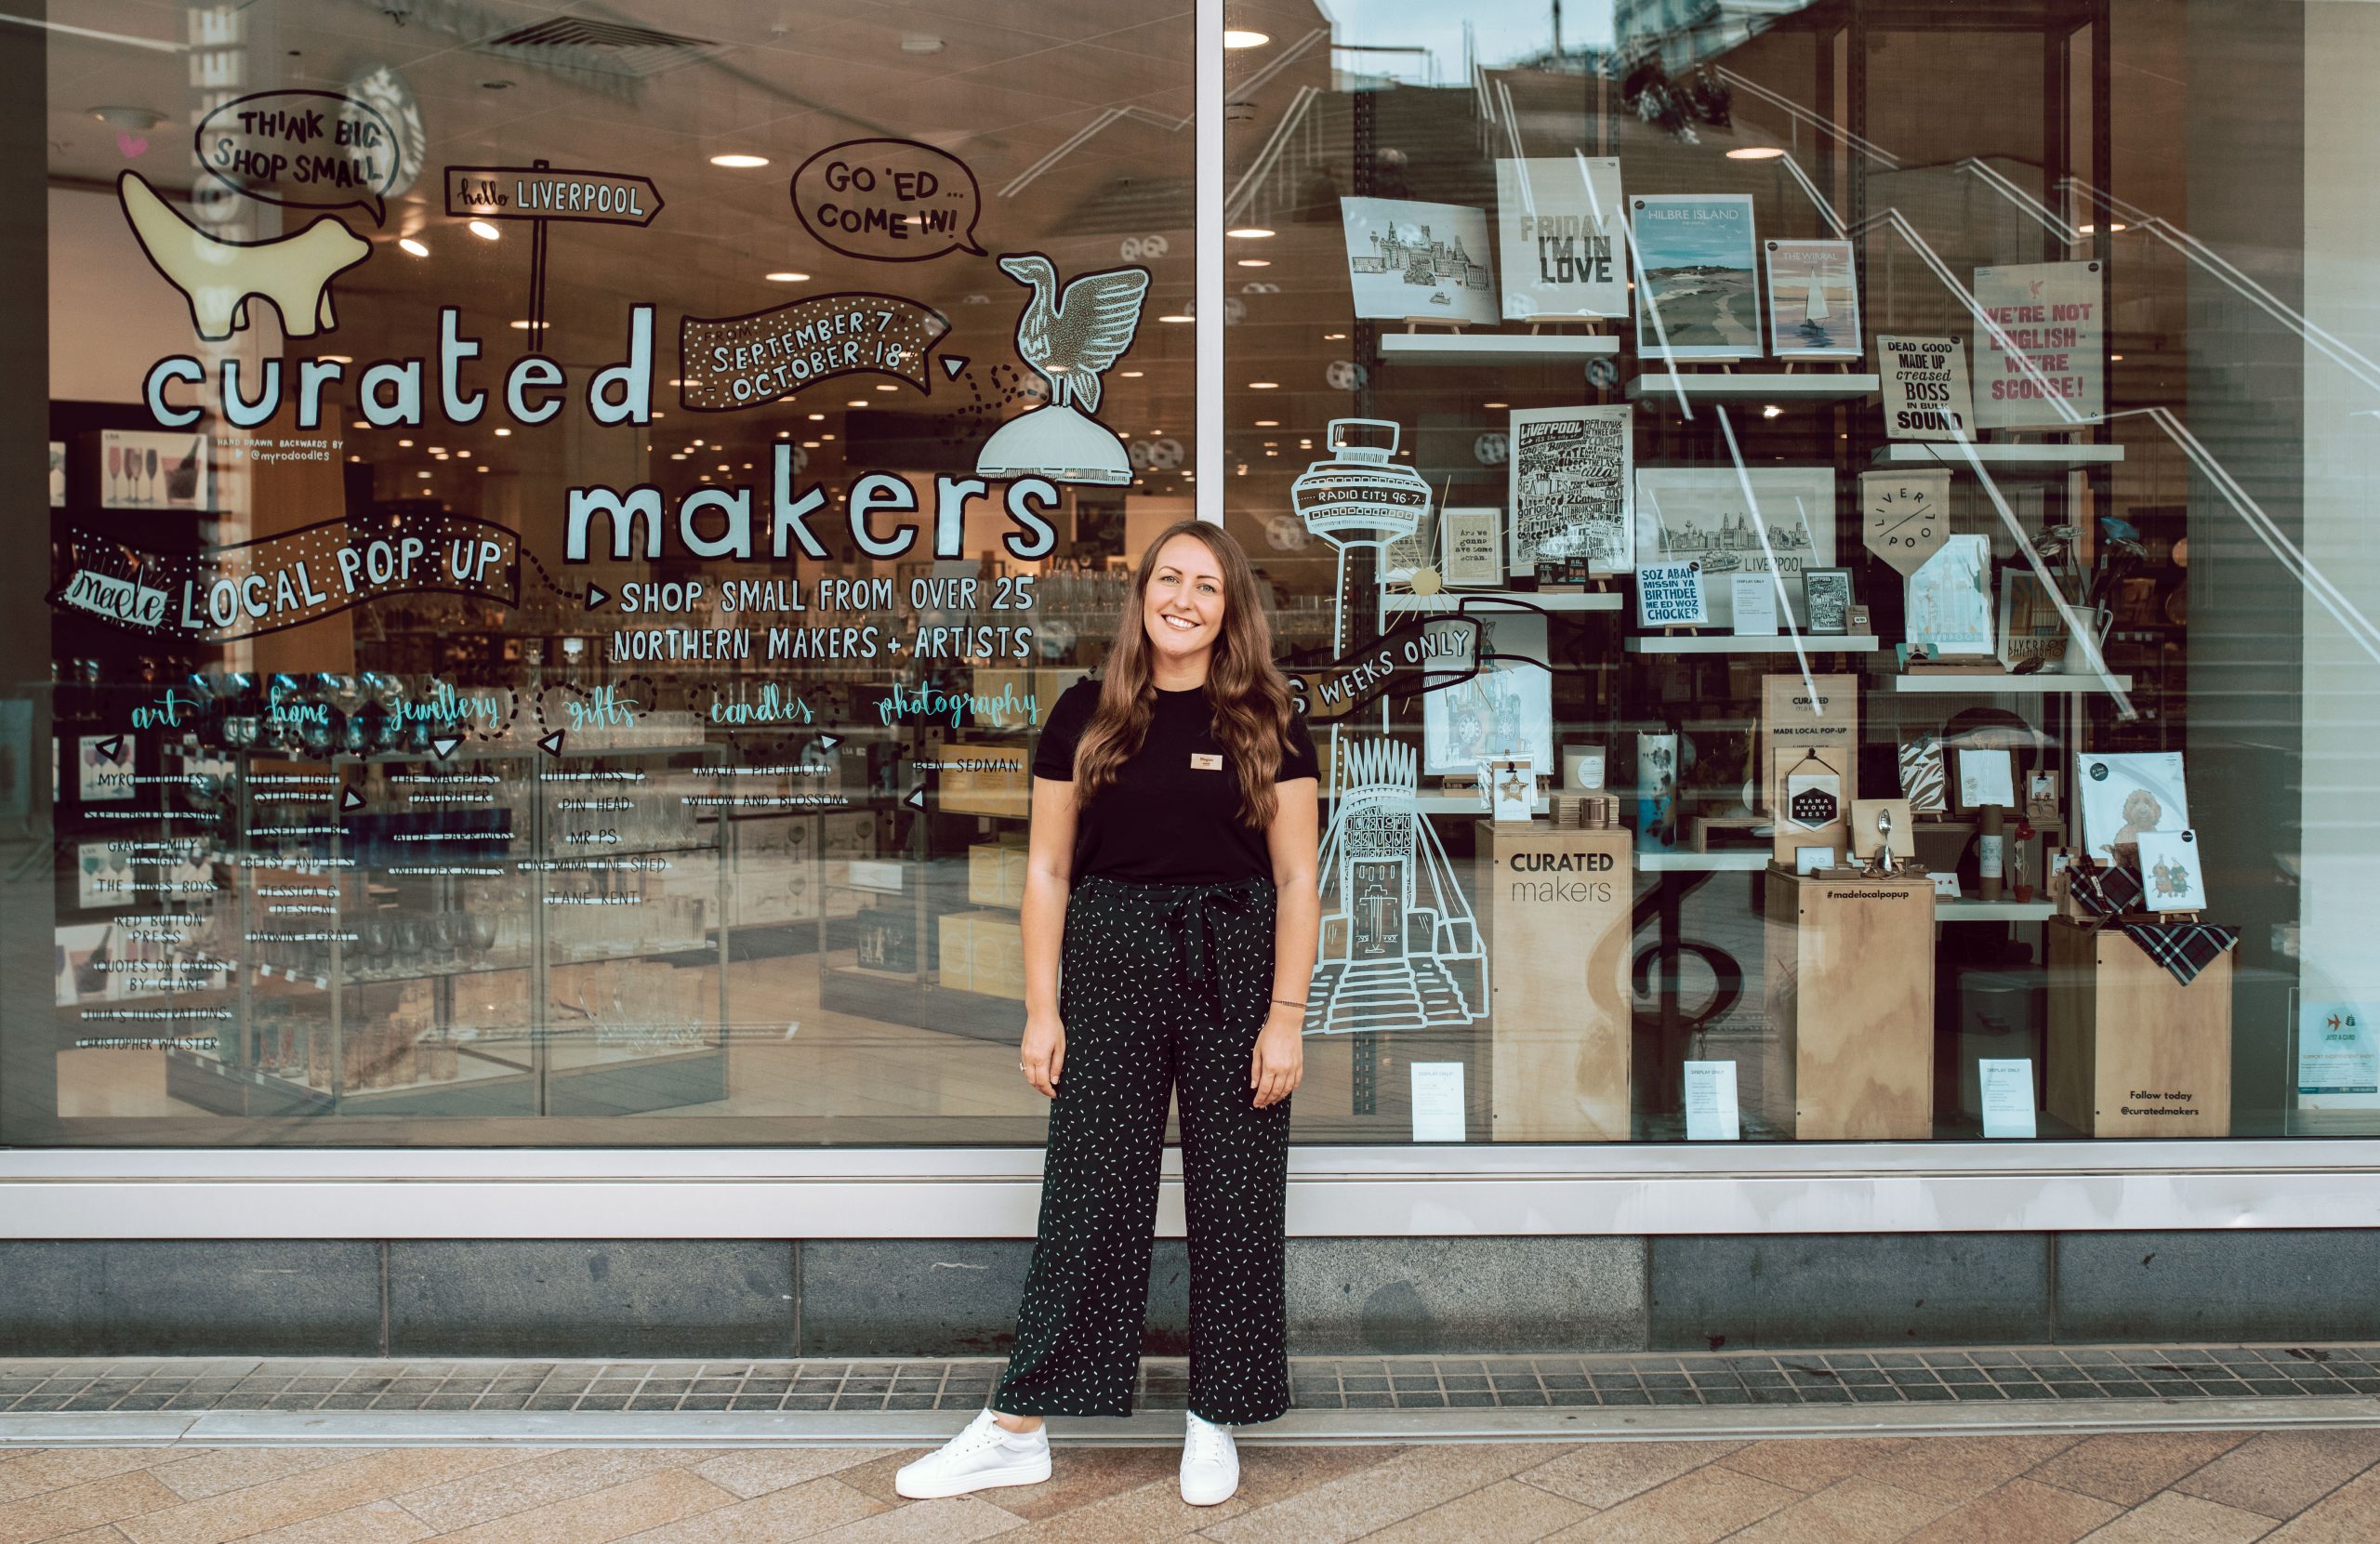 Young Innovators Success Stories: Megan Jones, Curated Makers, North West